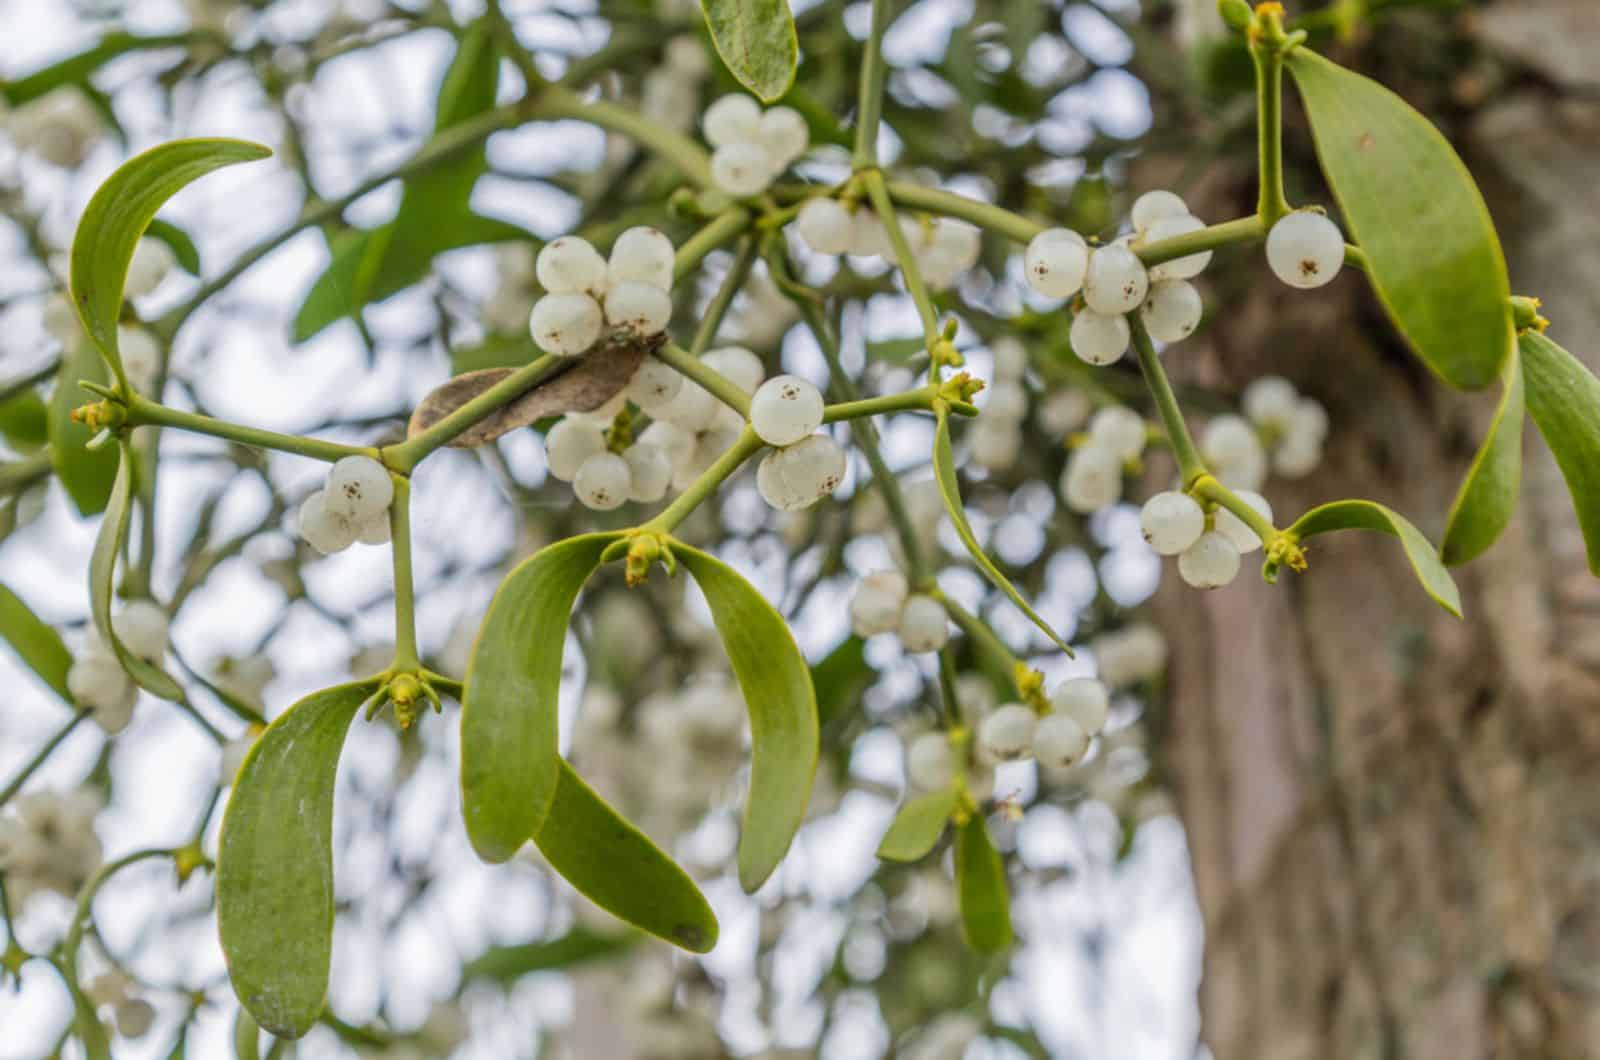 mistletoe with white berries growing on a tree